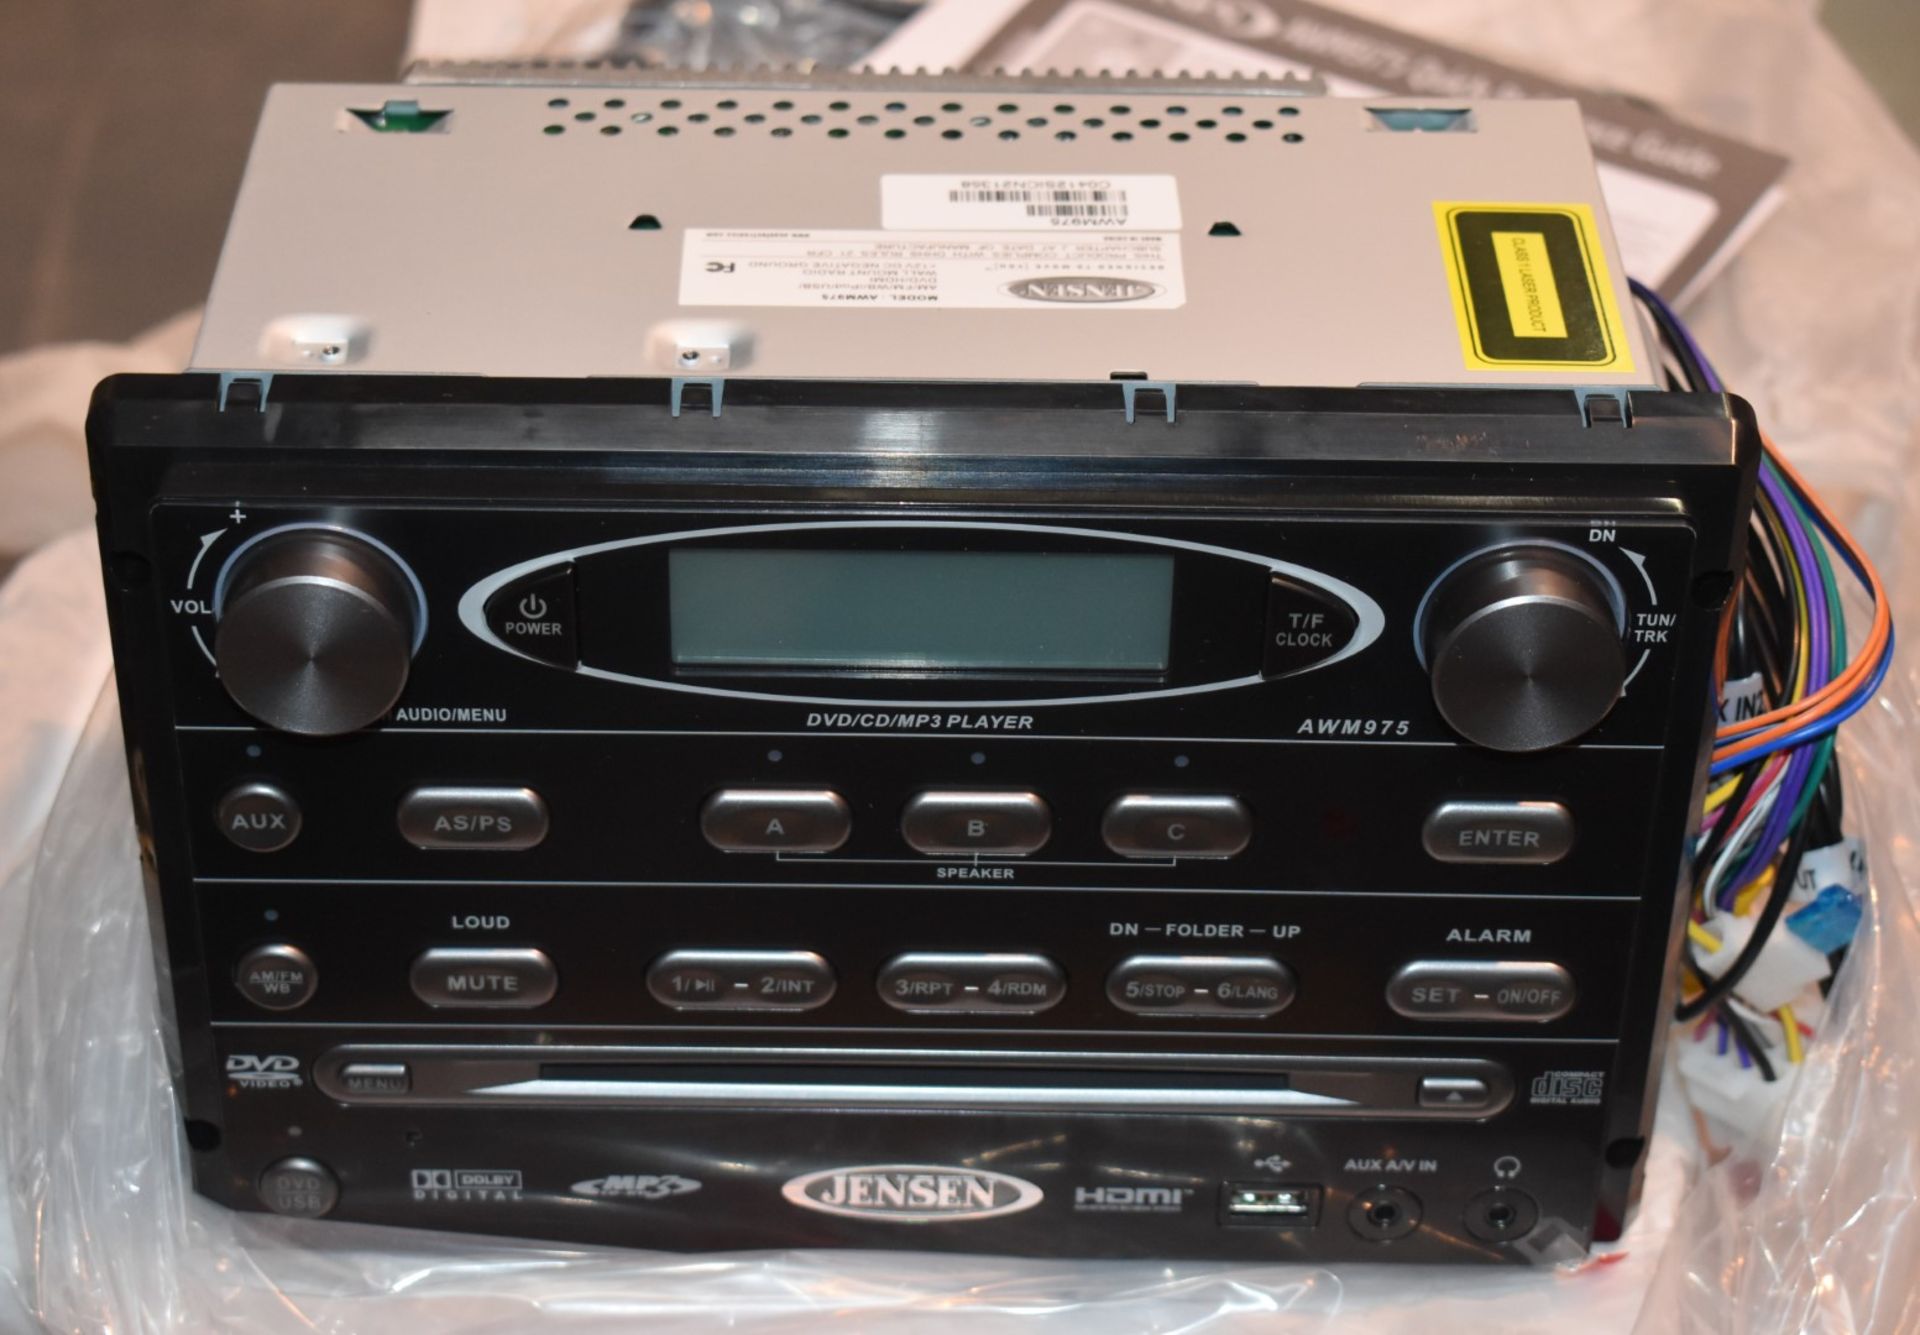 1 x Jenson AWM975 Entertainment System With Two MS5006W Speakers - Features DVD Player, CD, MP3, - Image 6 of 12